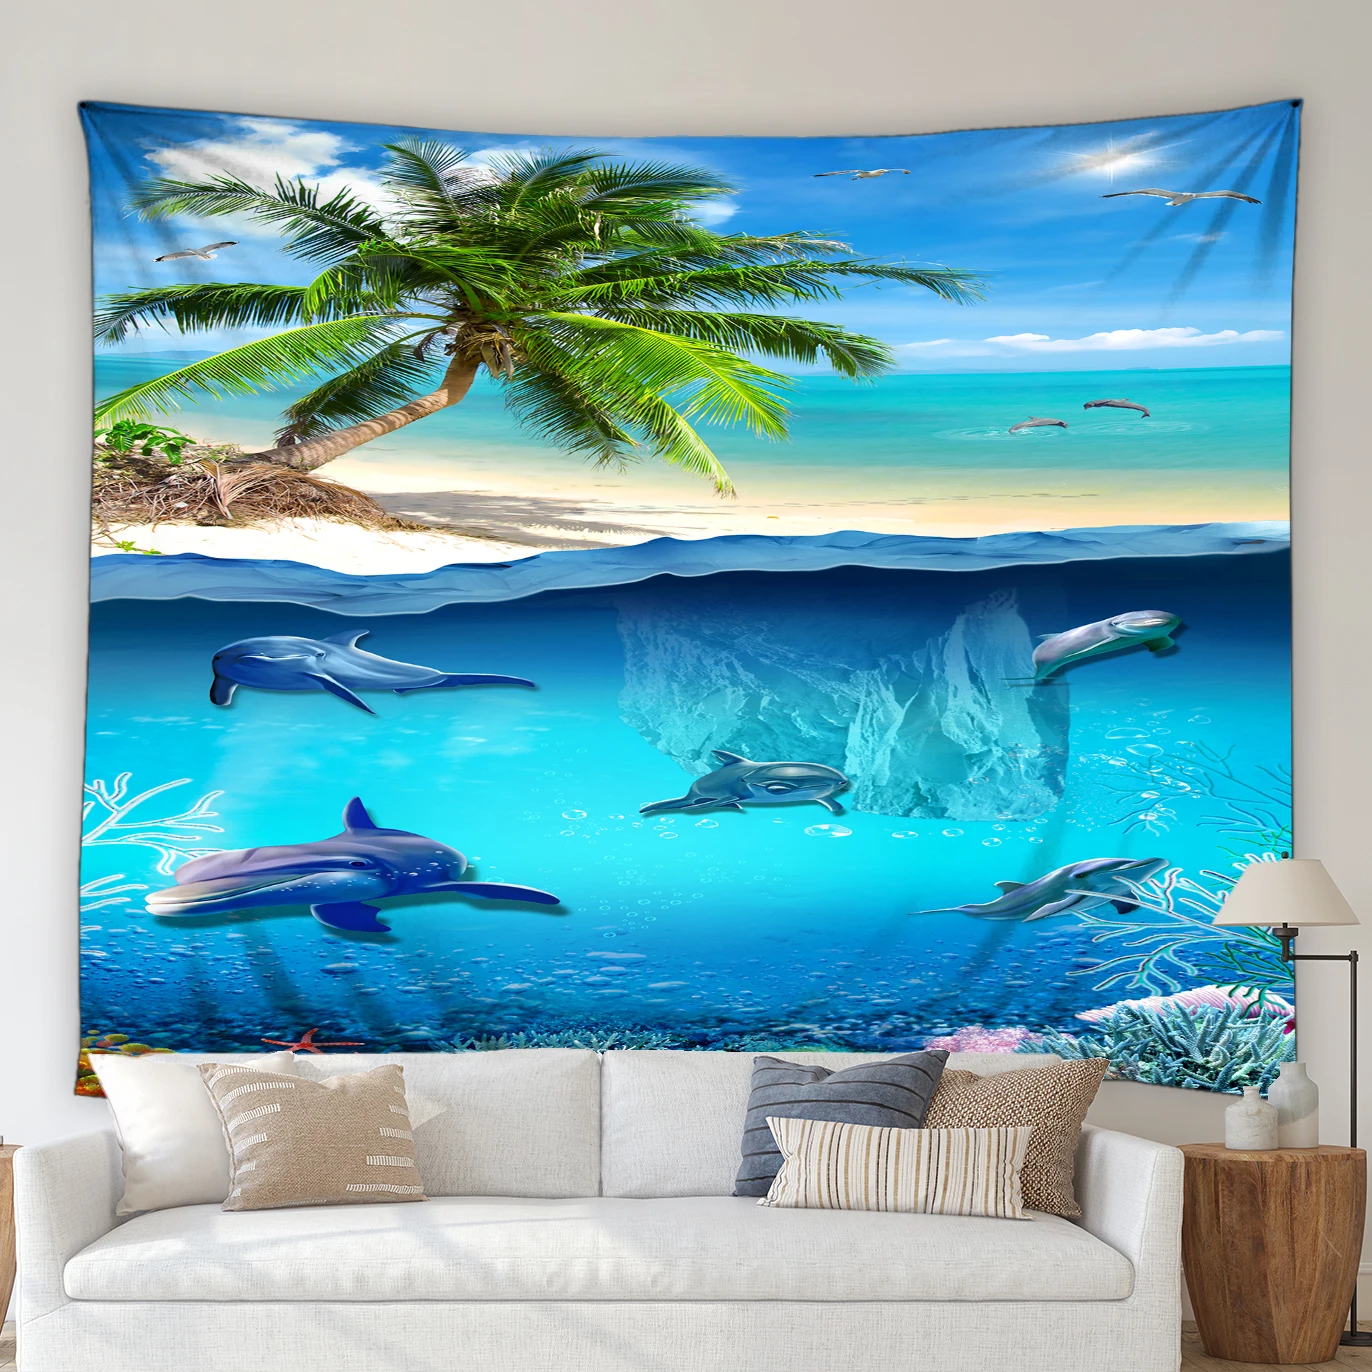 

Ocean Animals Big Tapestry Wall Hanging Dolphin Whale Shark Tropical Fish Green Plants Palm Tree Bedroom Living Room Decor Cloth